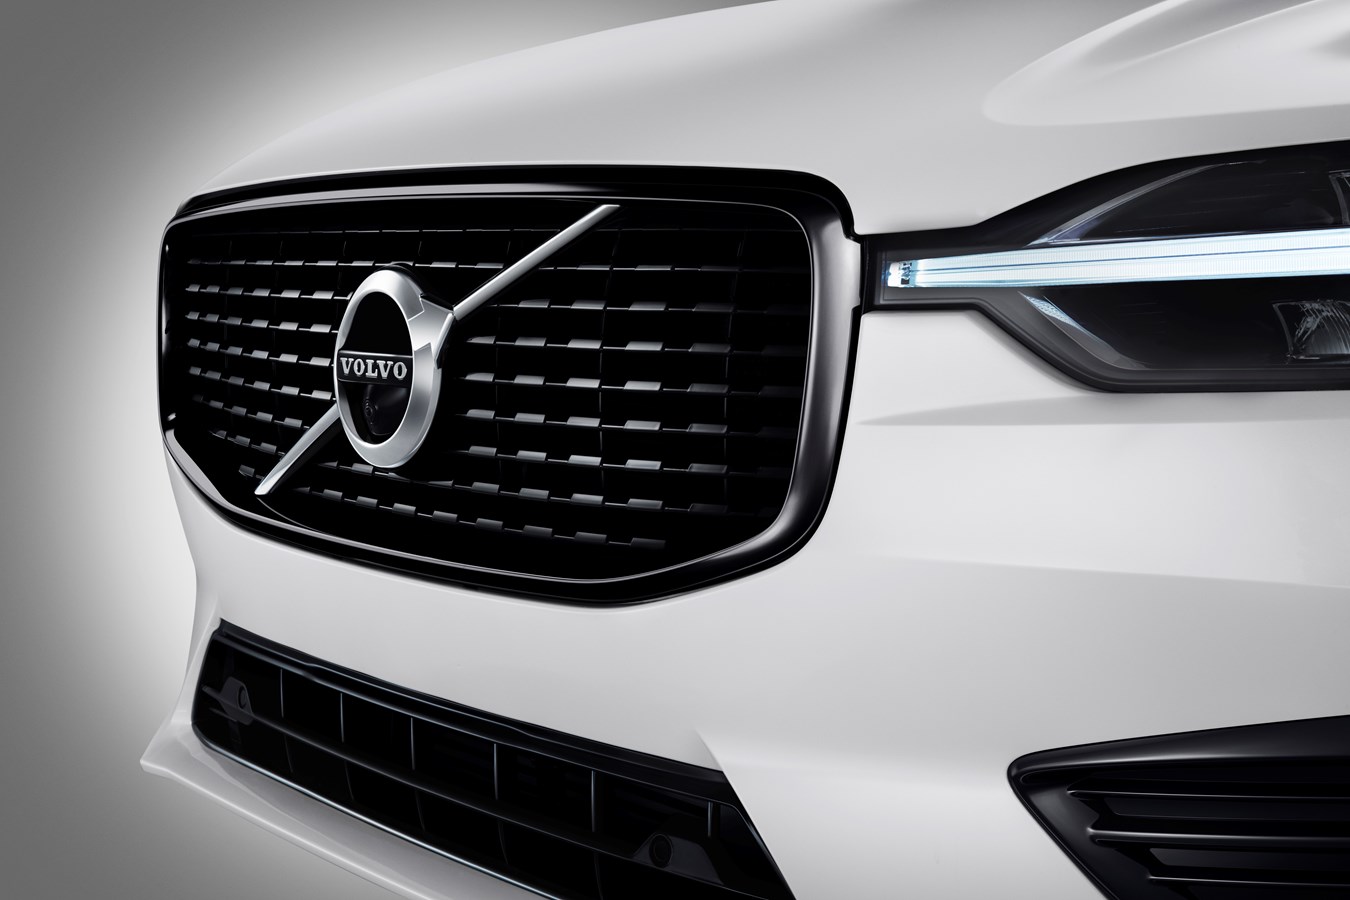 XC60 R-Design expression, in Crystal White Pearl